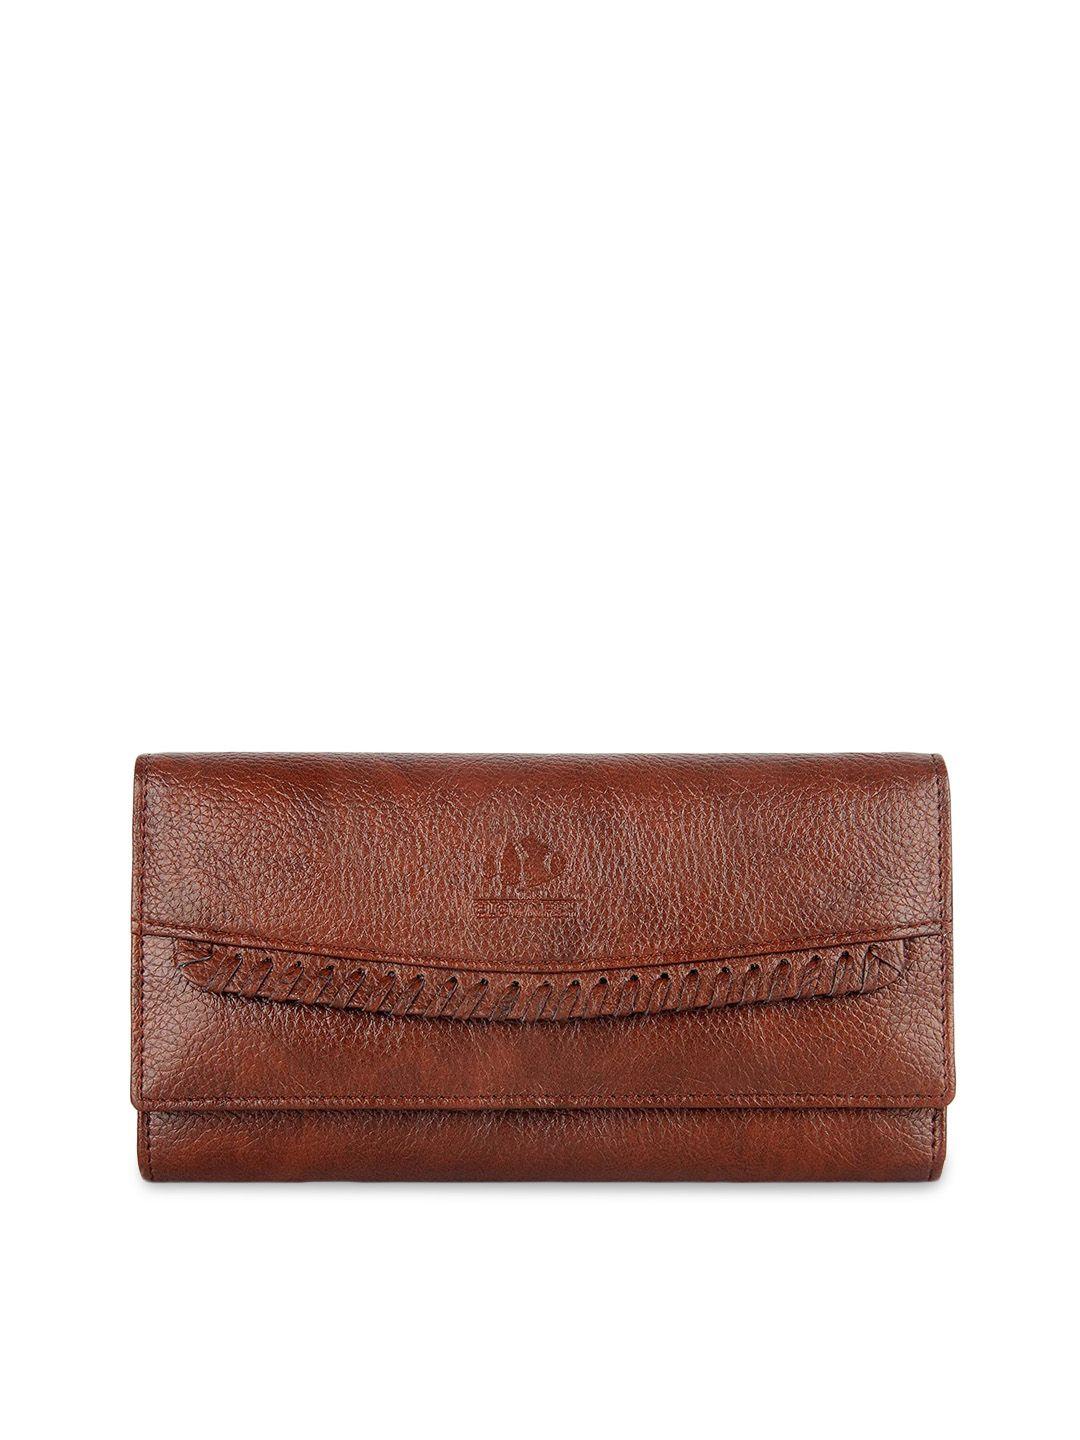 the clownfish women brown leather structured clutches